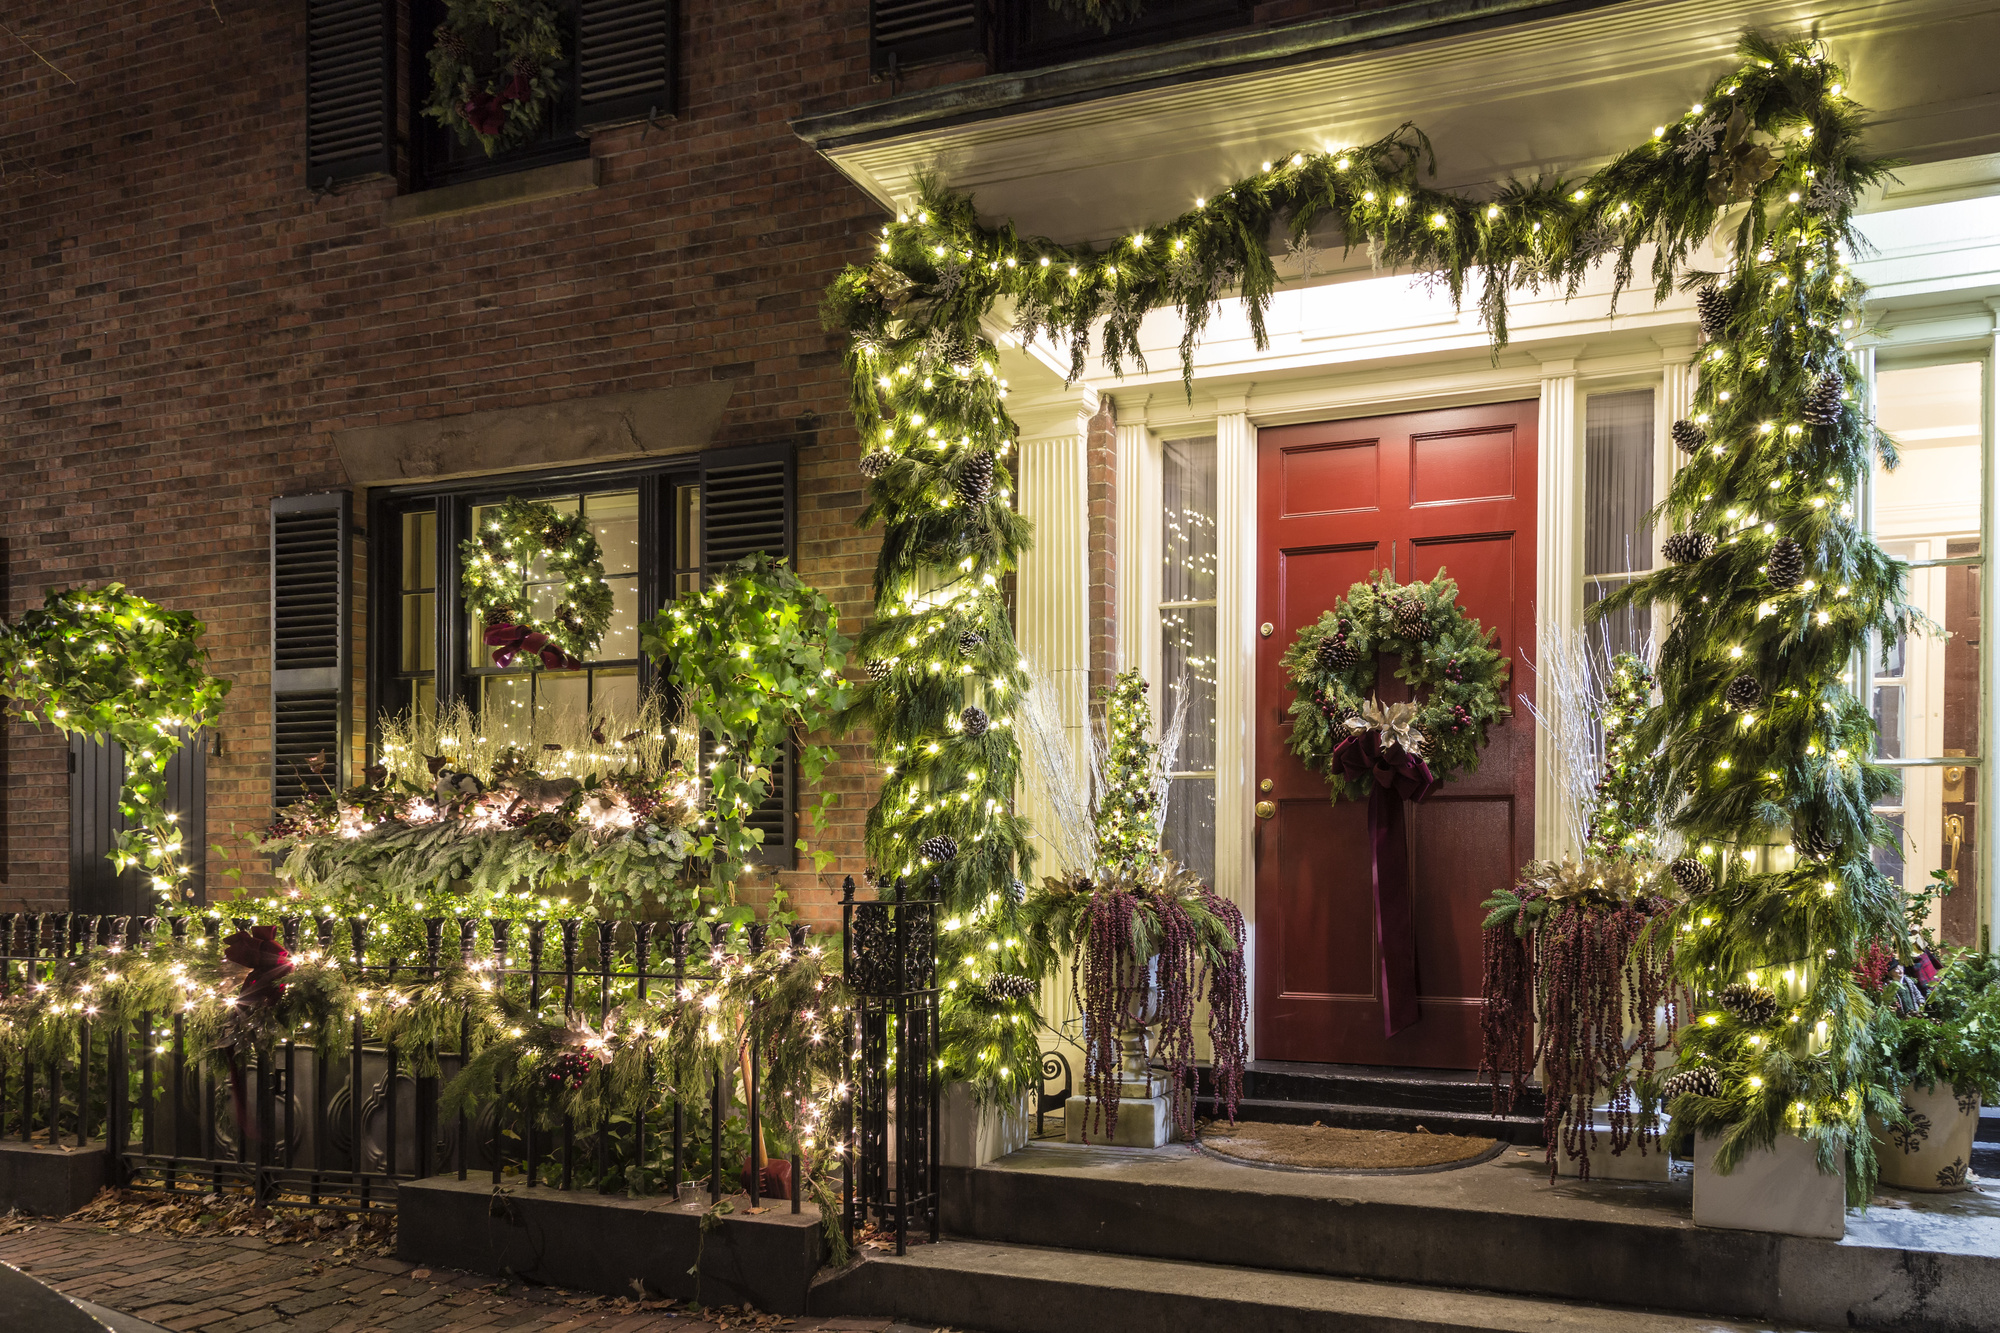 The Beginners Guide to Outdoor Christmas Decorating